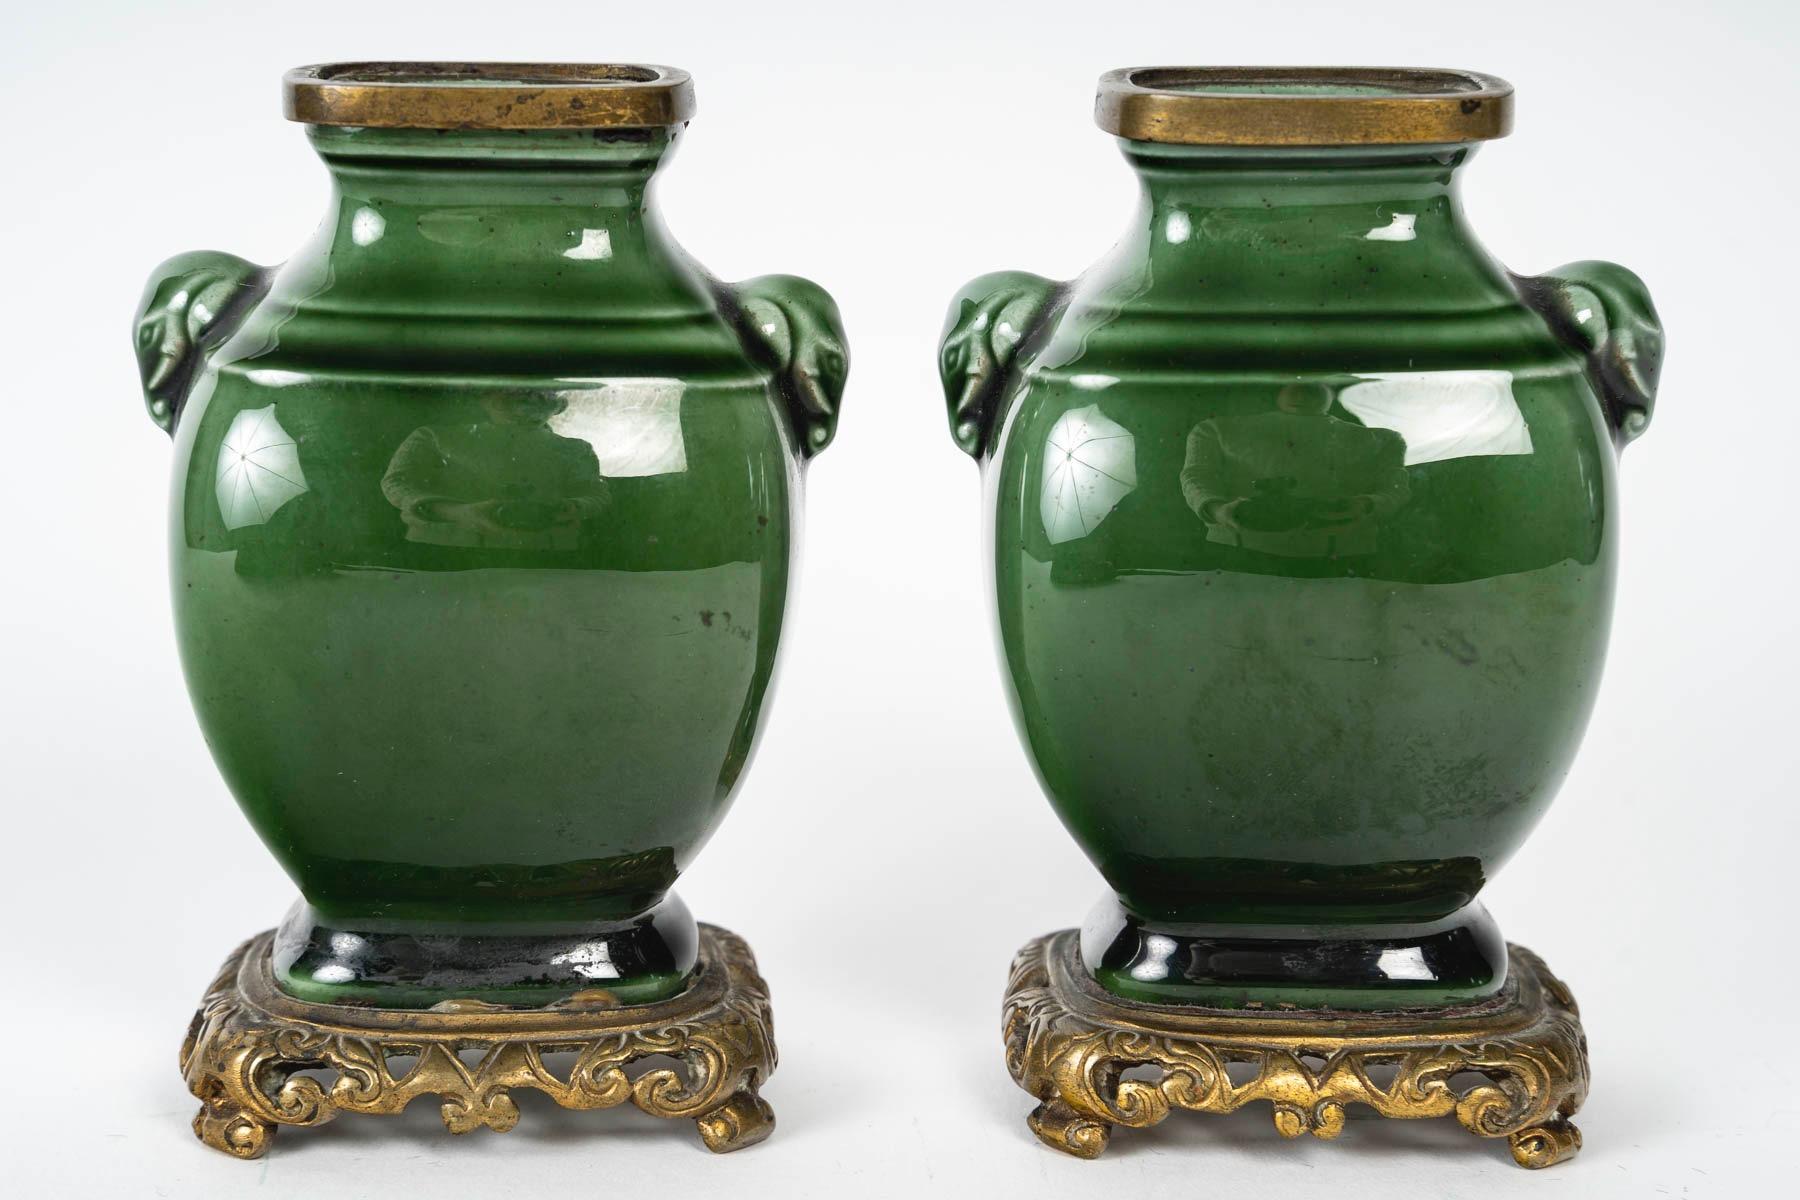 Théodore Deck (1823-1891), Miniature Pair of Faience Vases circa 1870 For Sale